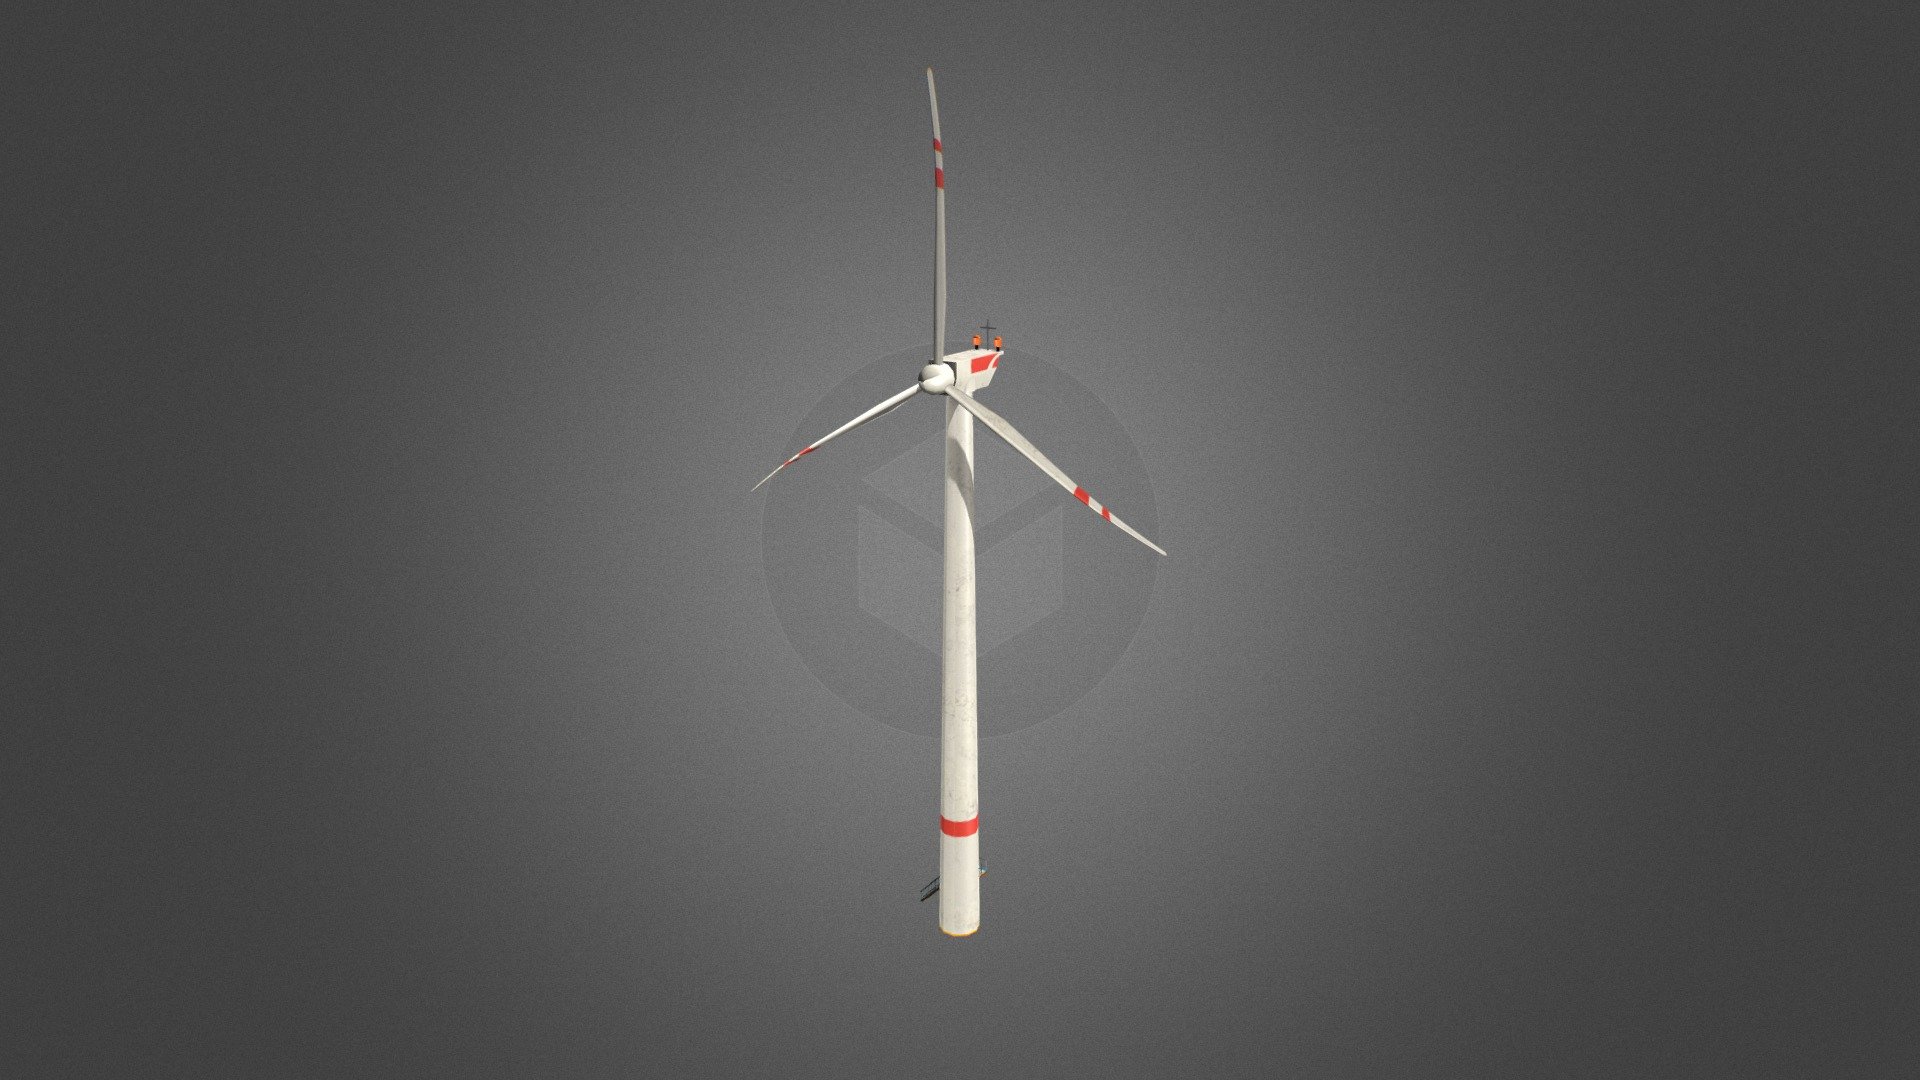 Low poly game-ready 3d model of a Wind turbine for Virtual Reality (VR), Augmented Reality (AR), games and other real-time apps - Wind turbine - Buy Royalty Free 3D model by CG Duck (@cg_duck) 3d model